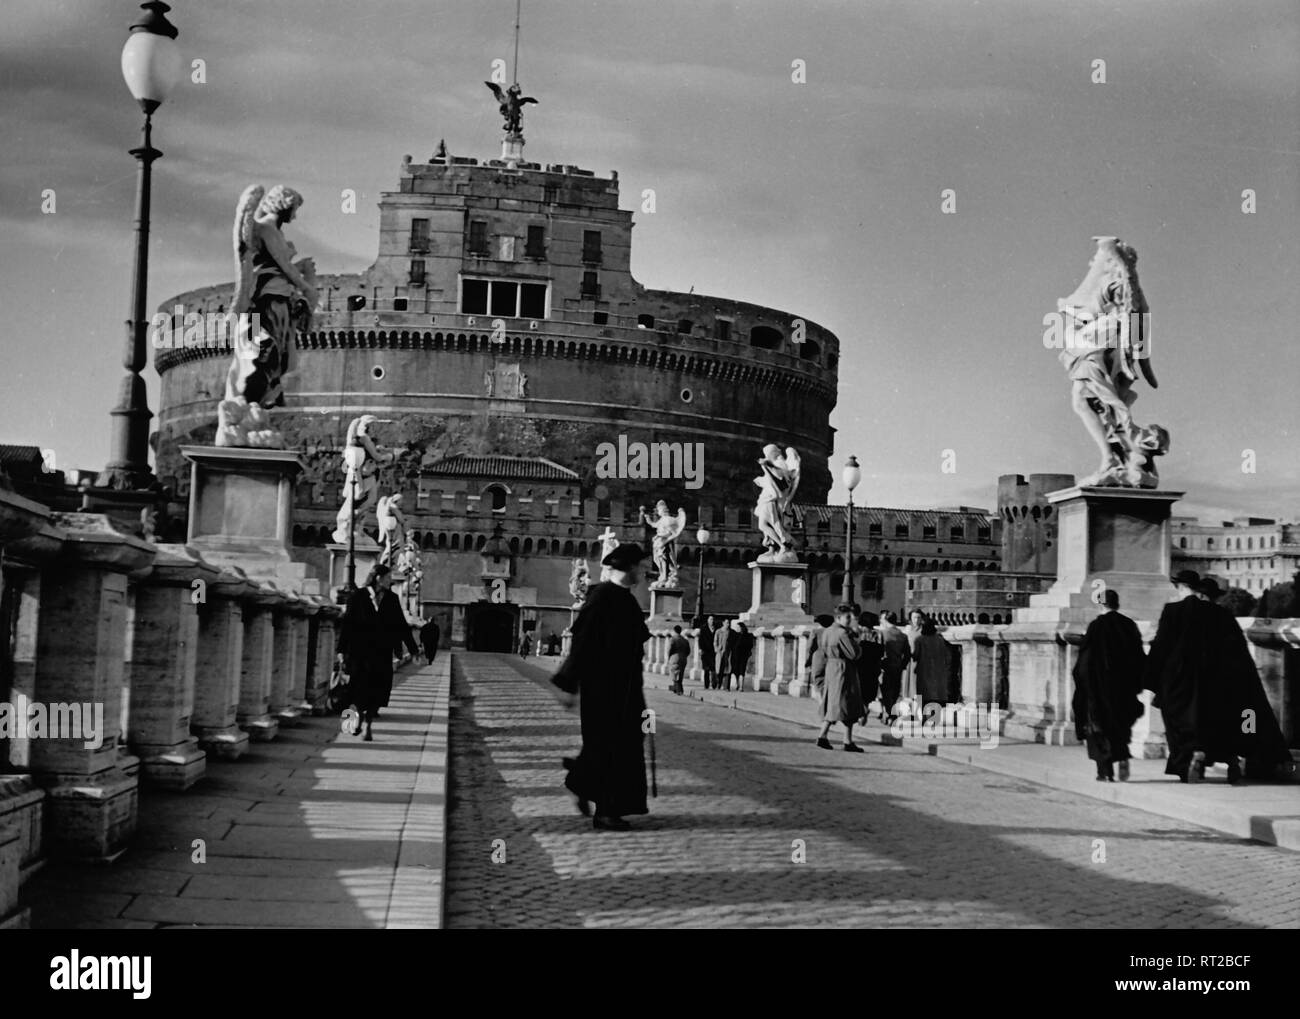 Travel to Rome - Italy in 1950s - priests crossing the St. Angel Bridge. In the background the Castel Sant' Angelo  in Rome. Engelsburg und Engelsbrücke in Rom, Italien. Image date 1954. Photo Erich Andres Stock Photo